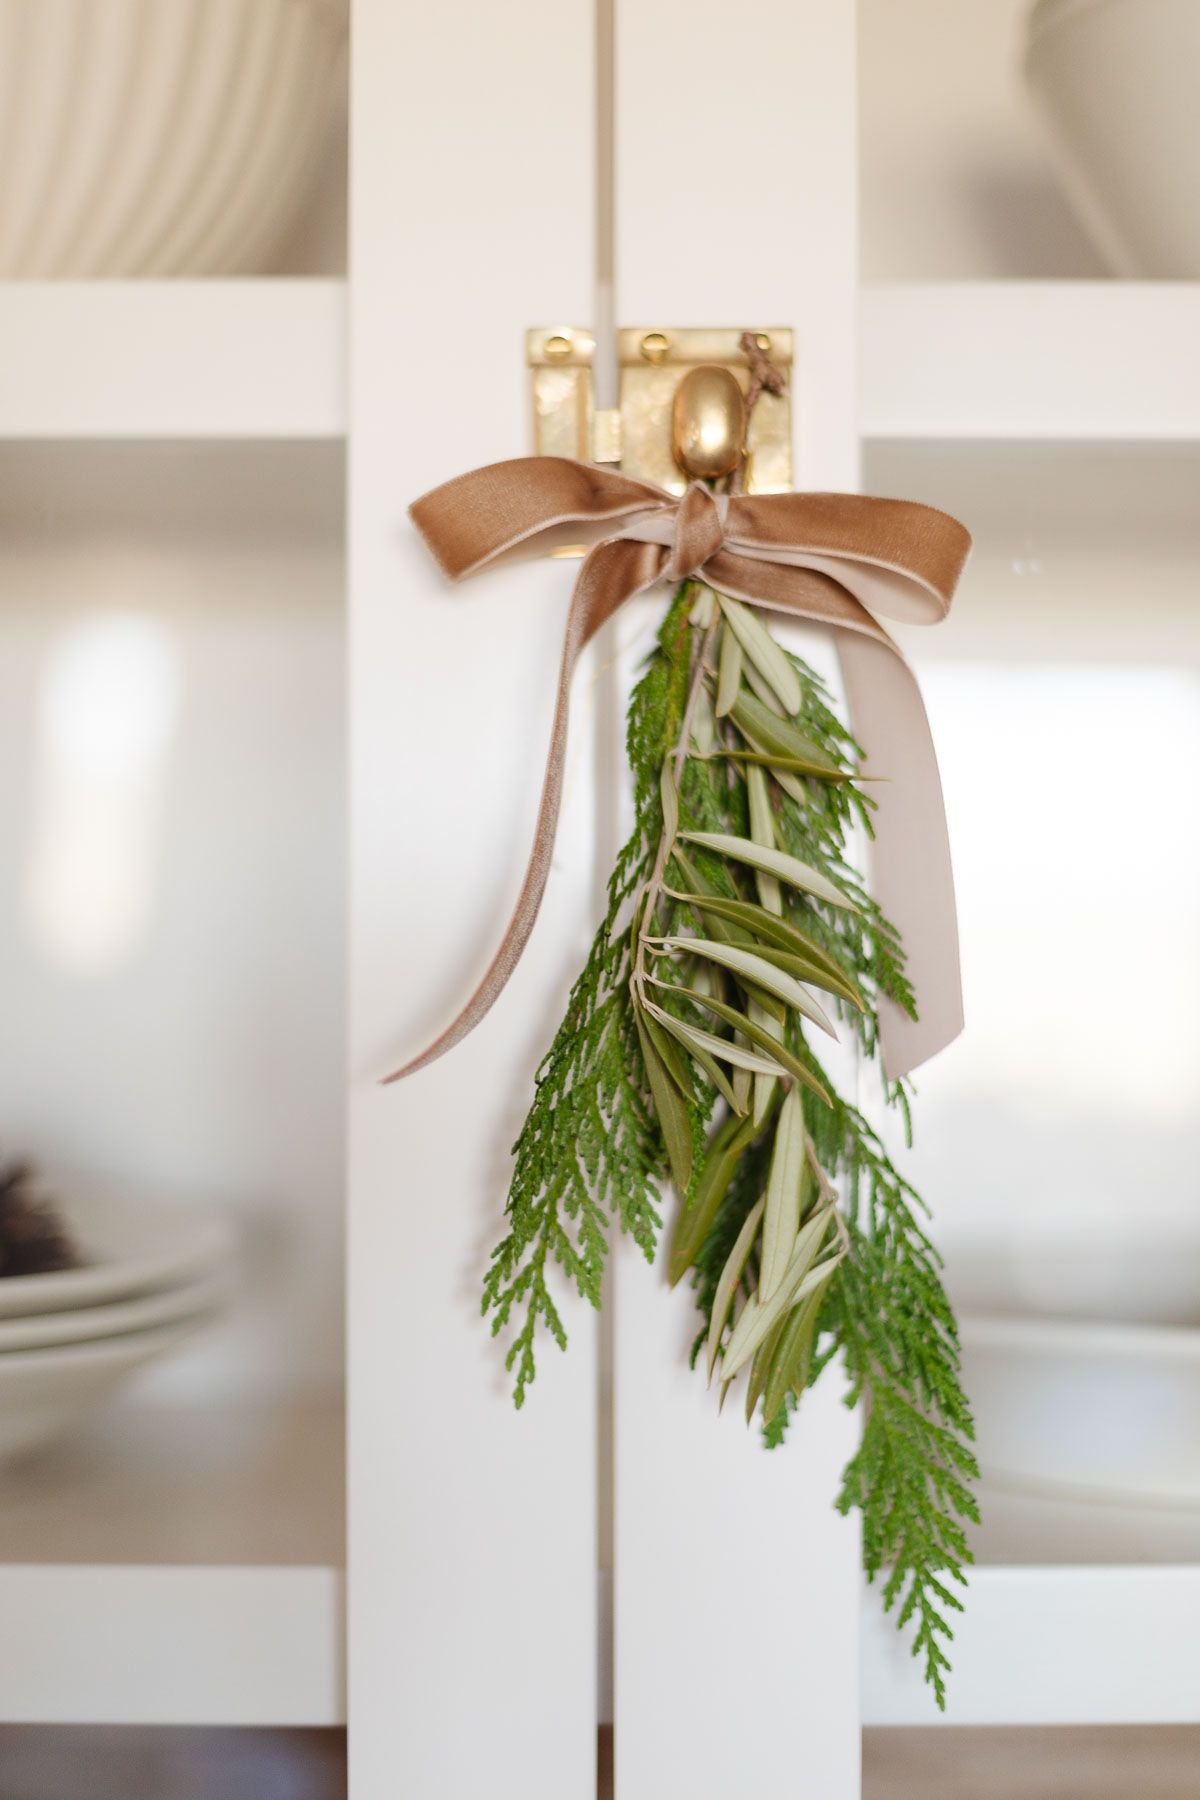 Fresh Christmas greenery tied with a bow onto a brass cabinet pull.